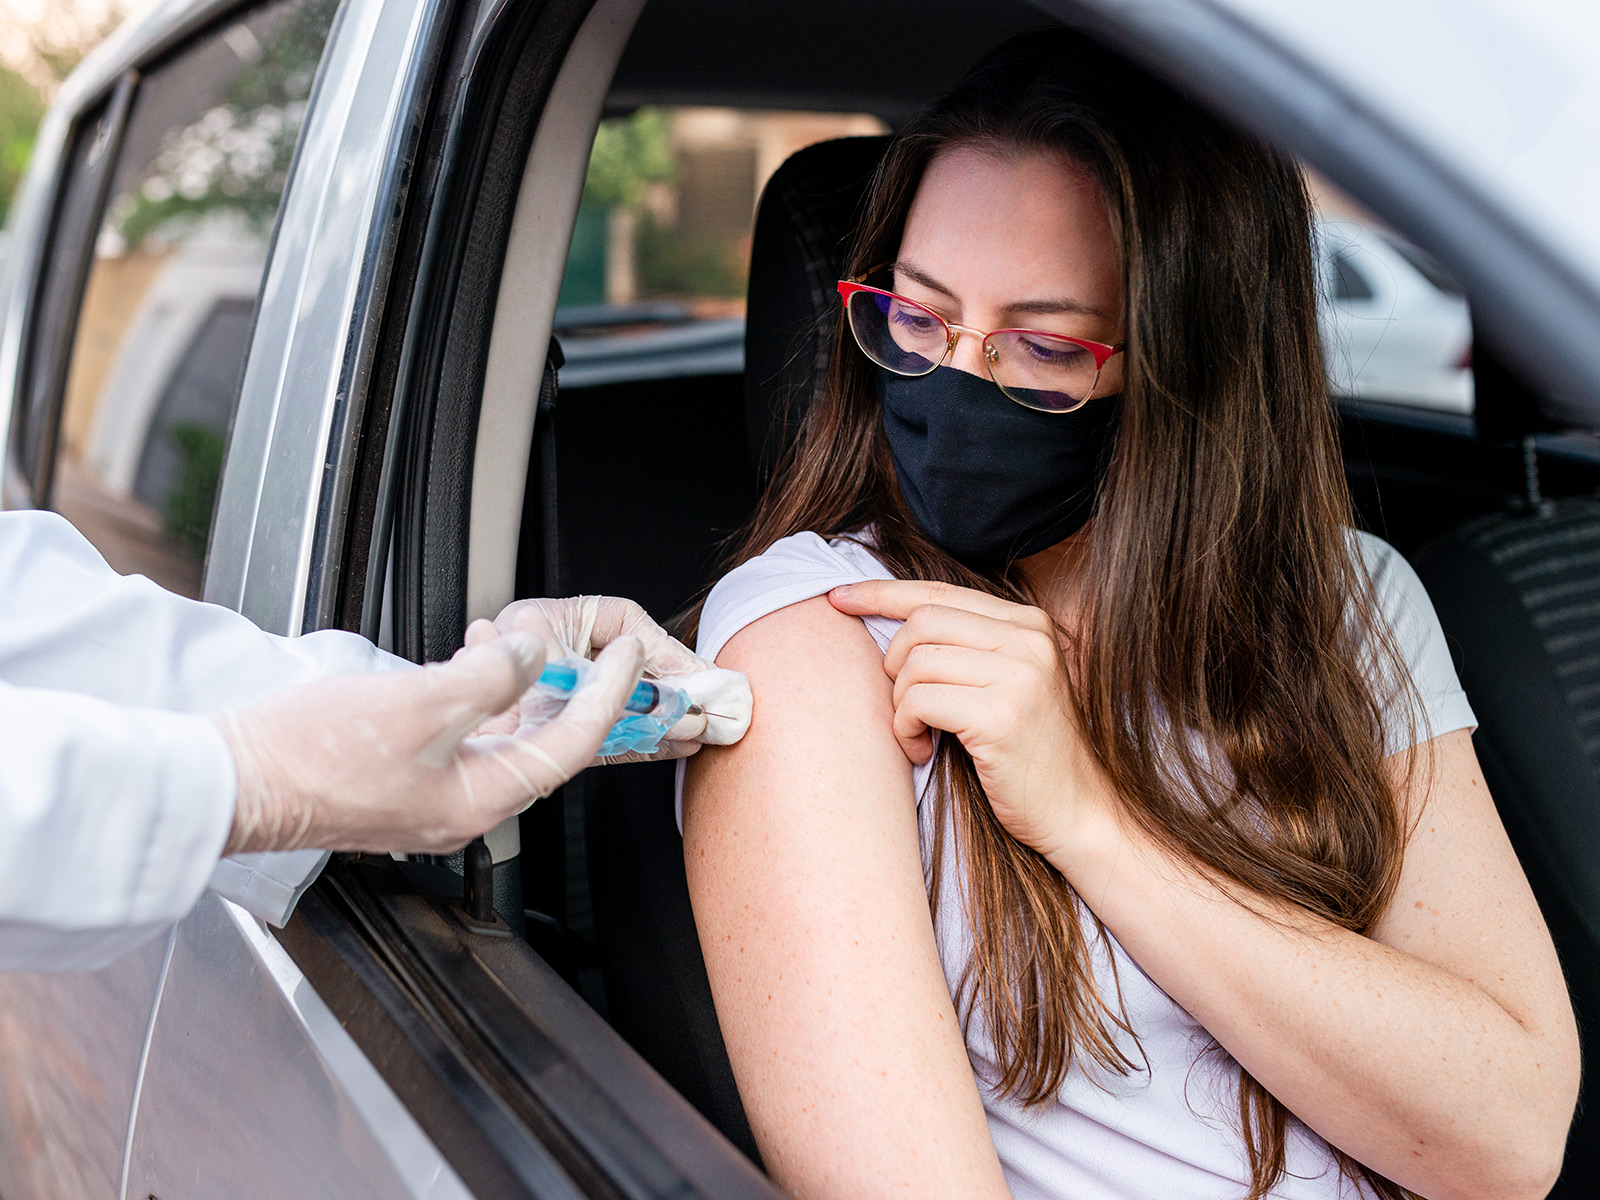 Young woman receives a vaccine from a healthcare professional at a drive-thru clinic